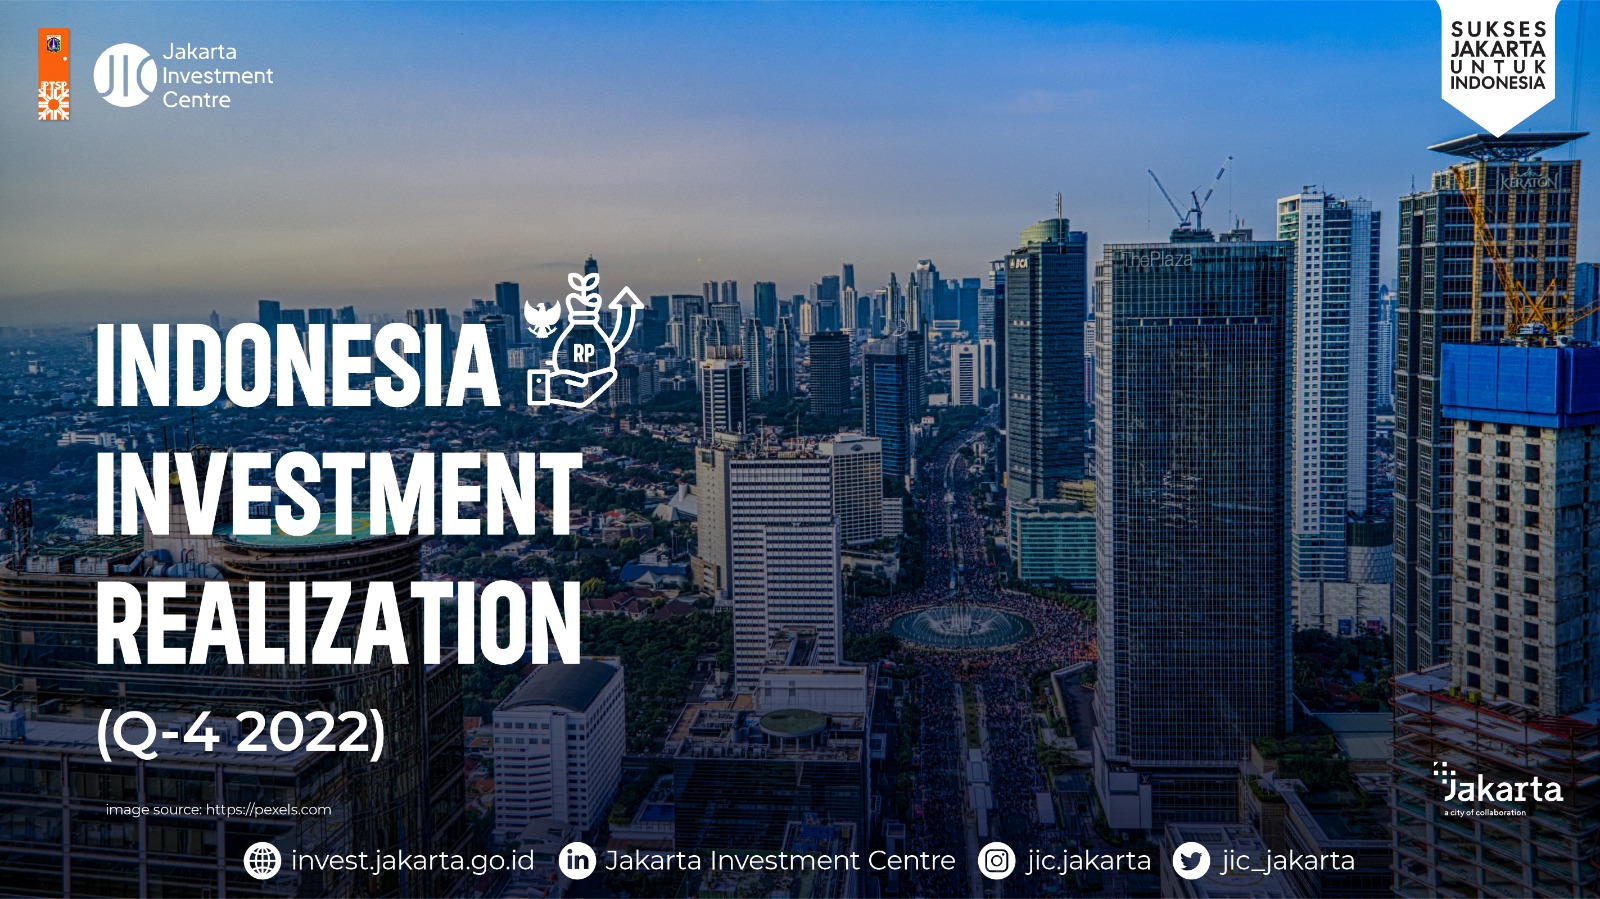 Investment Realization in Indonesia: October 2022 to December 2022